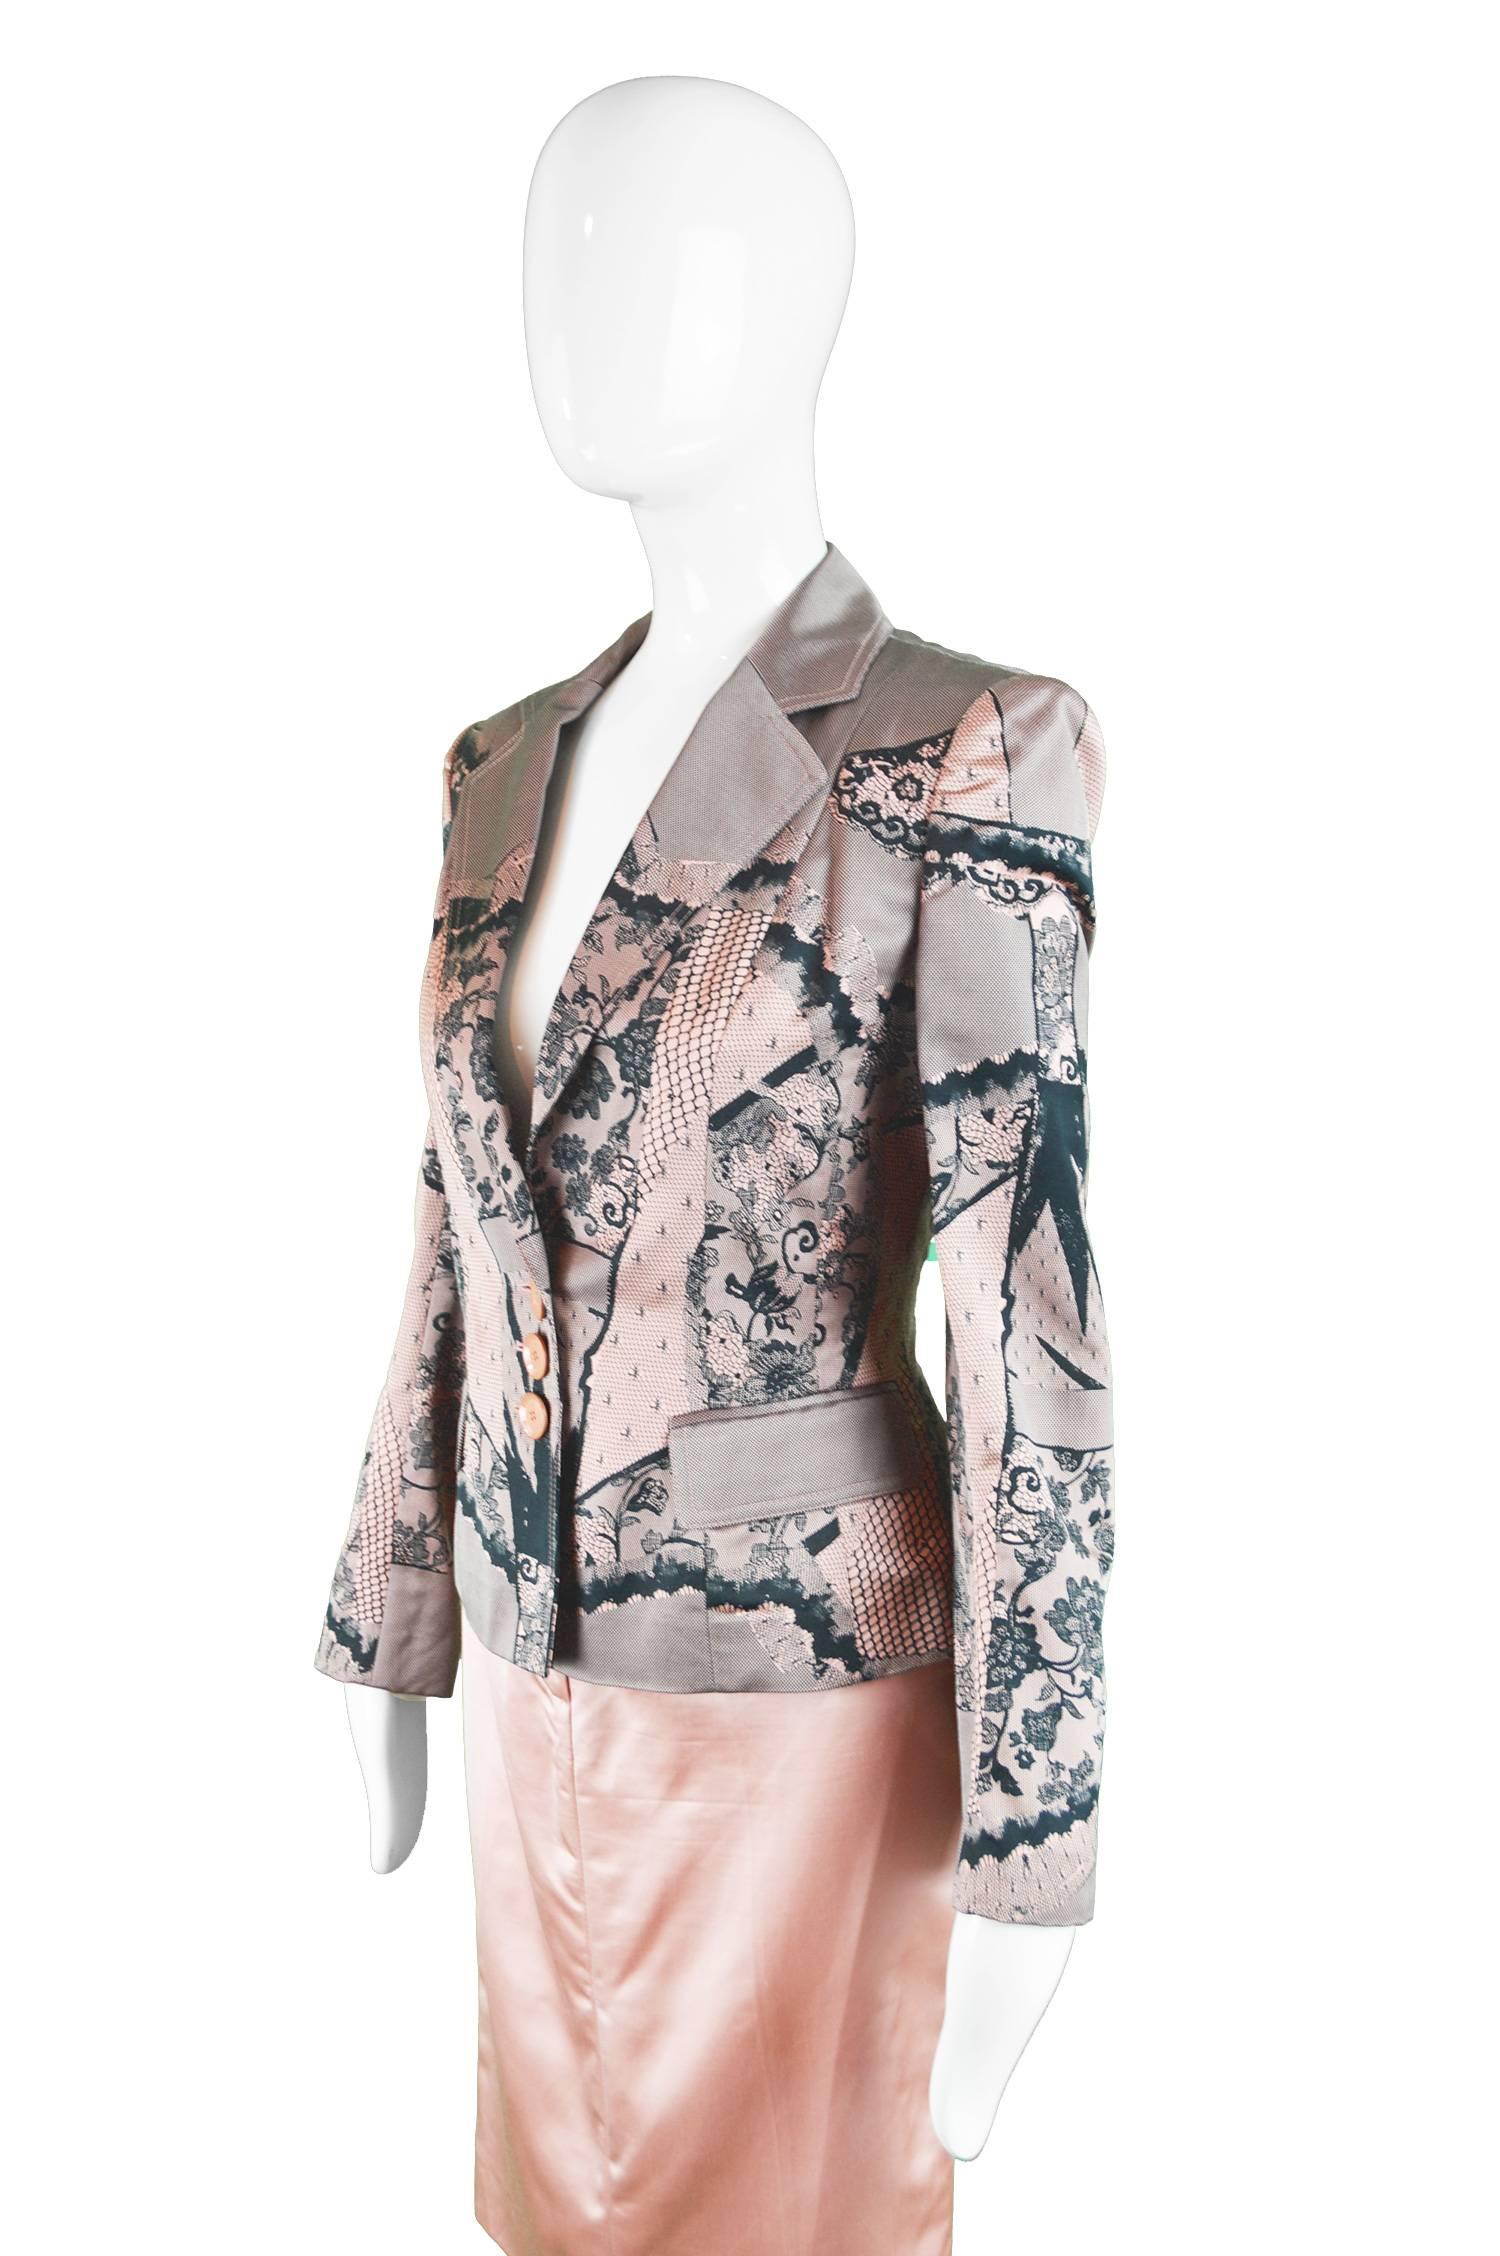 Women's John Galliano for Christian Dior Trompe L'oeil Lace Effect Skirt Suit, S/S 2006